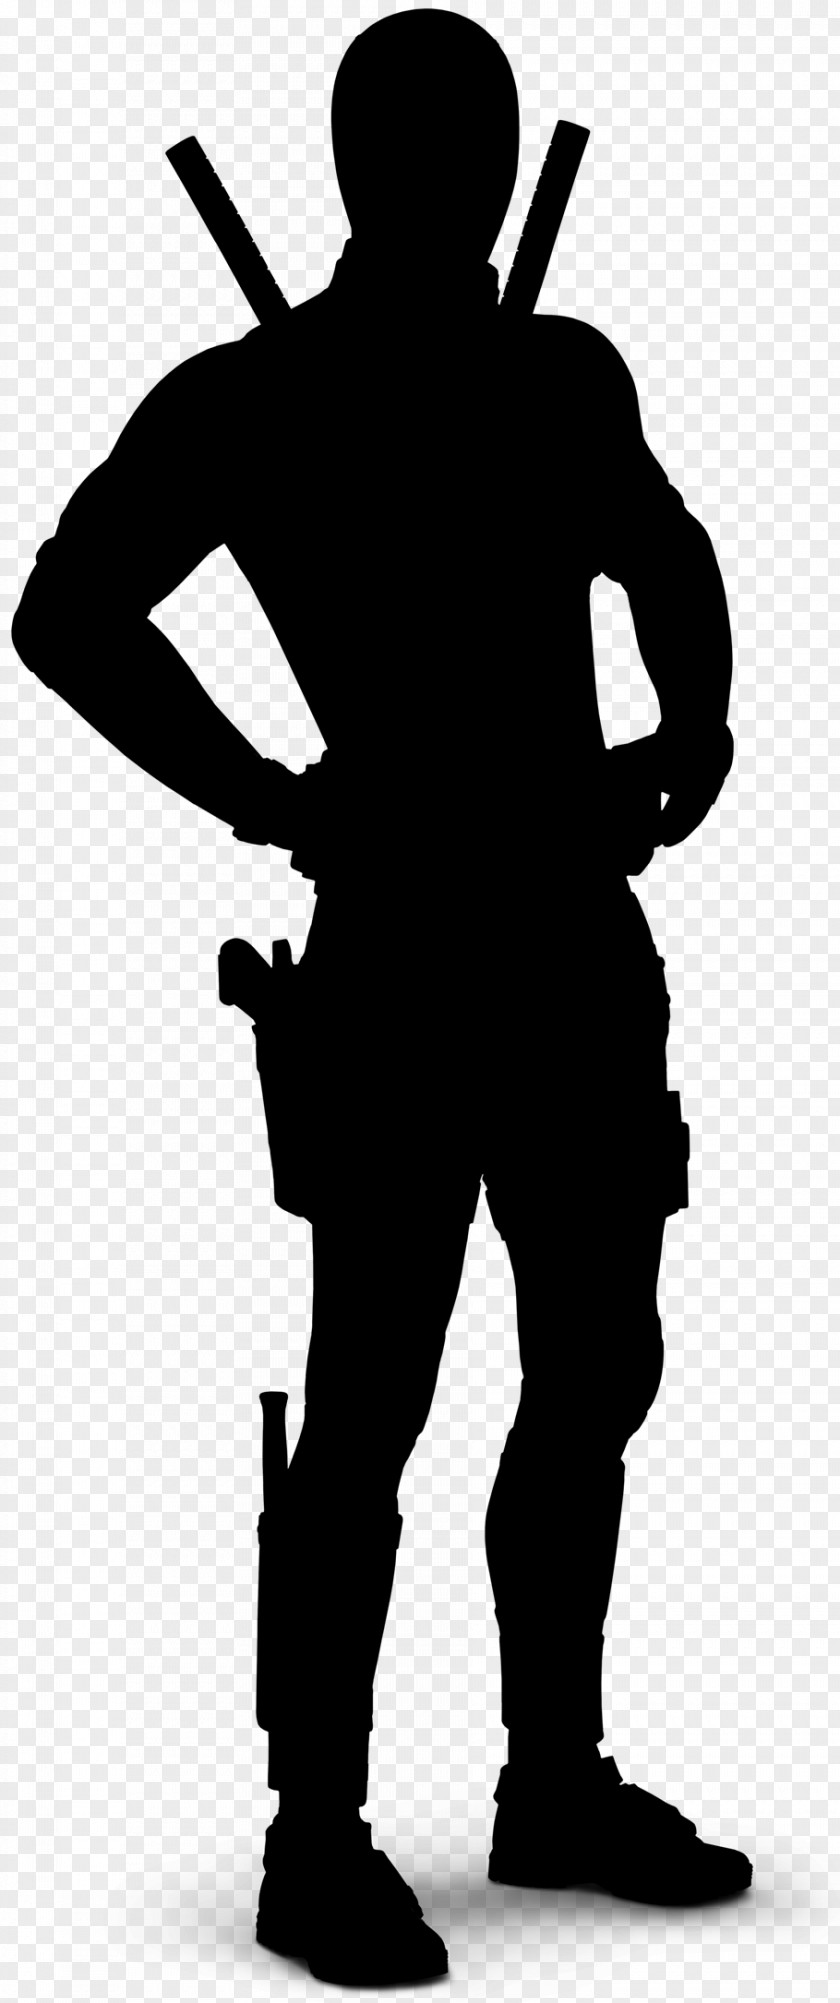 Silhouette Drawing Image Vector Graphics Clip Art PNG